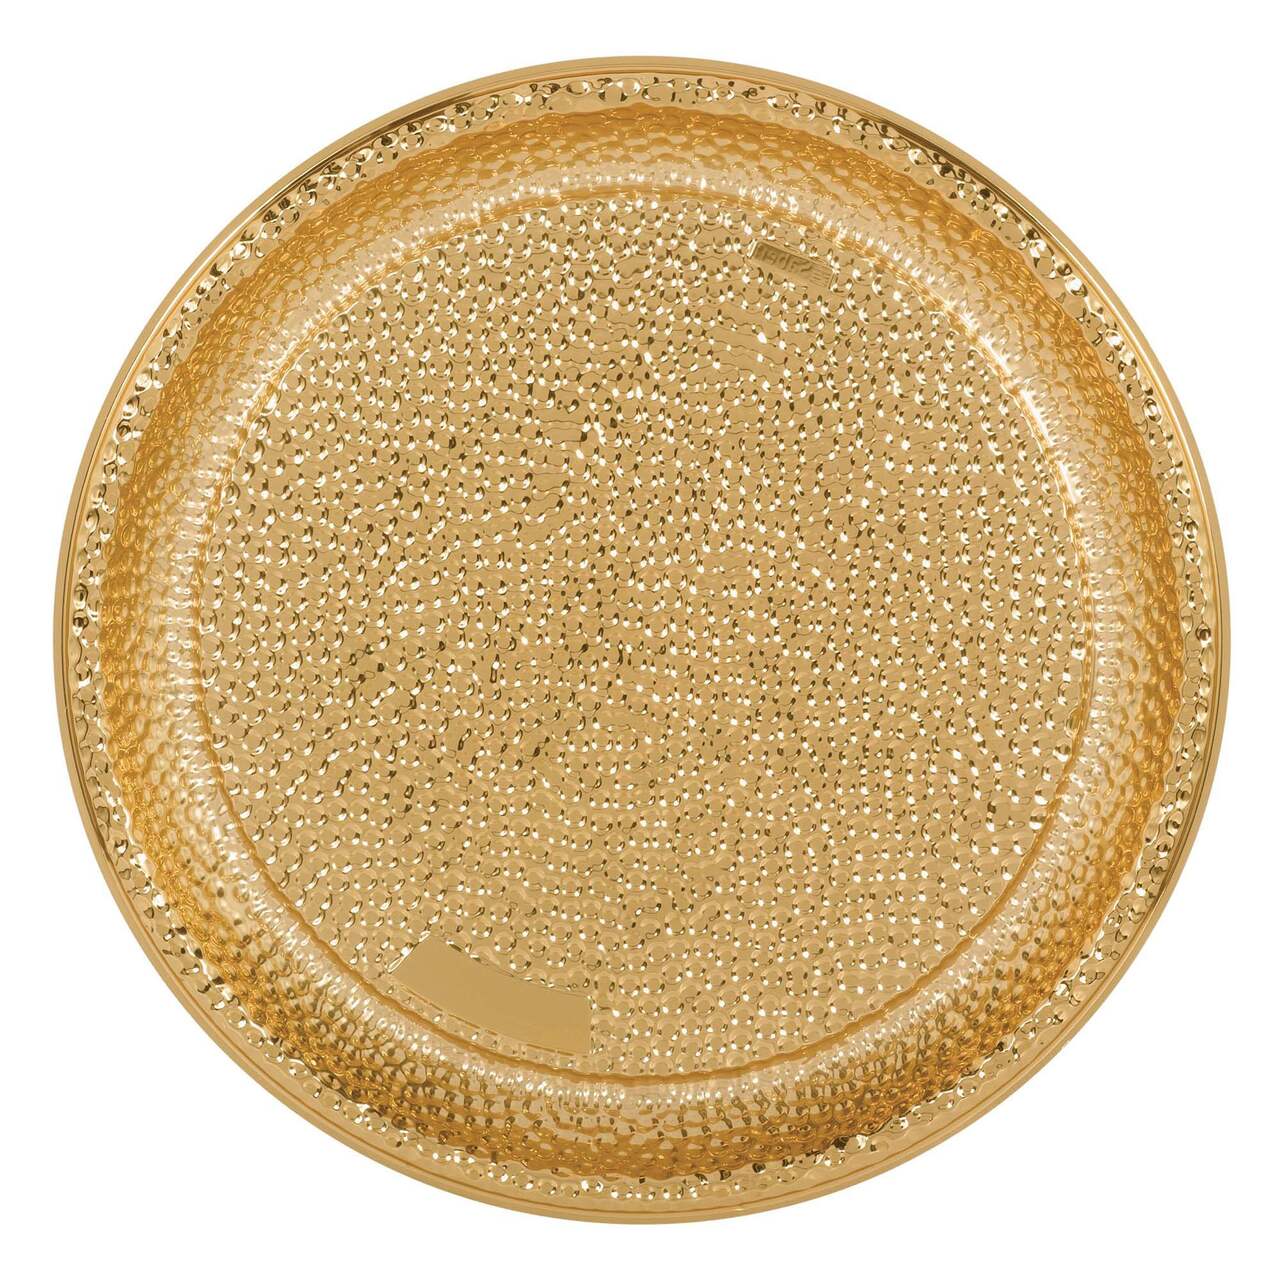 https://media-www.canadiantire.ca/product/automotive/party-city-everyday/partycity-everyday-dining-entertaining/8420714/16-tray-hammered-gold-3151db65-e13d-4a2c-84a6-1b9bd0b8114c-jpgrendition.jpg?imdensity=1&imwidth=1244&impolicy=mZoom